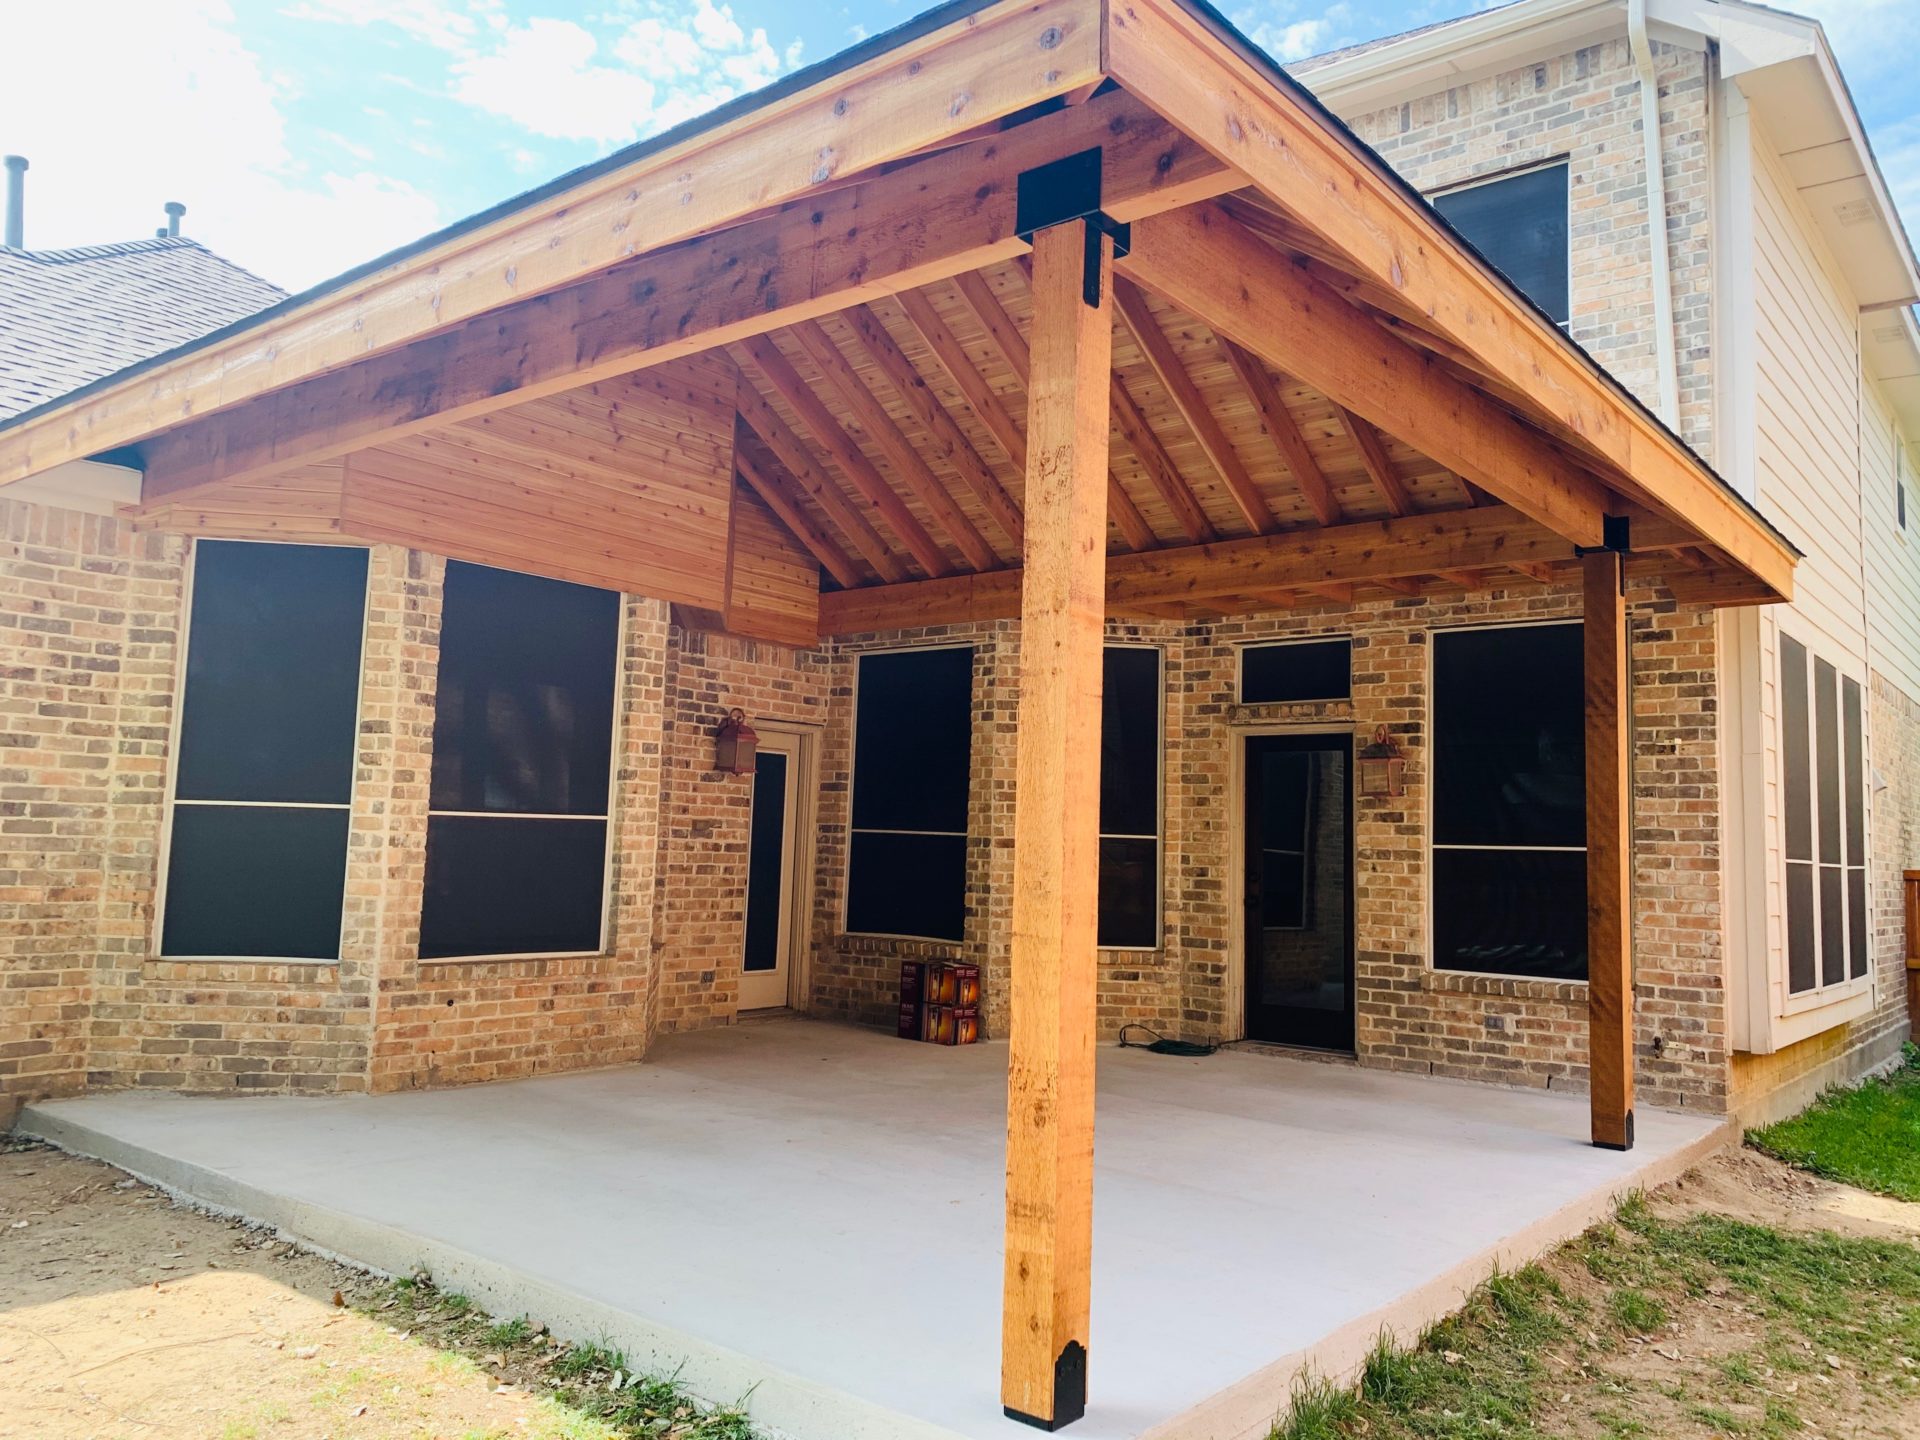 Finished outdoor patio roof construction project with Pavilion style in Arlington, TX